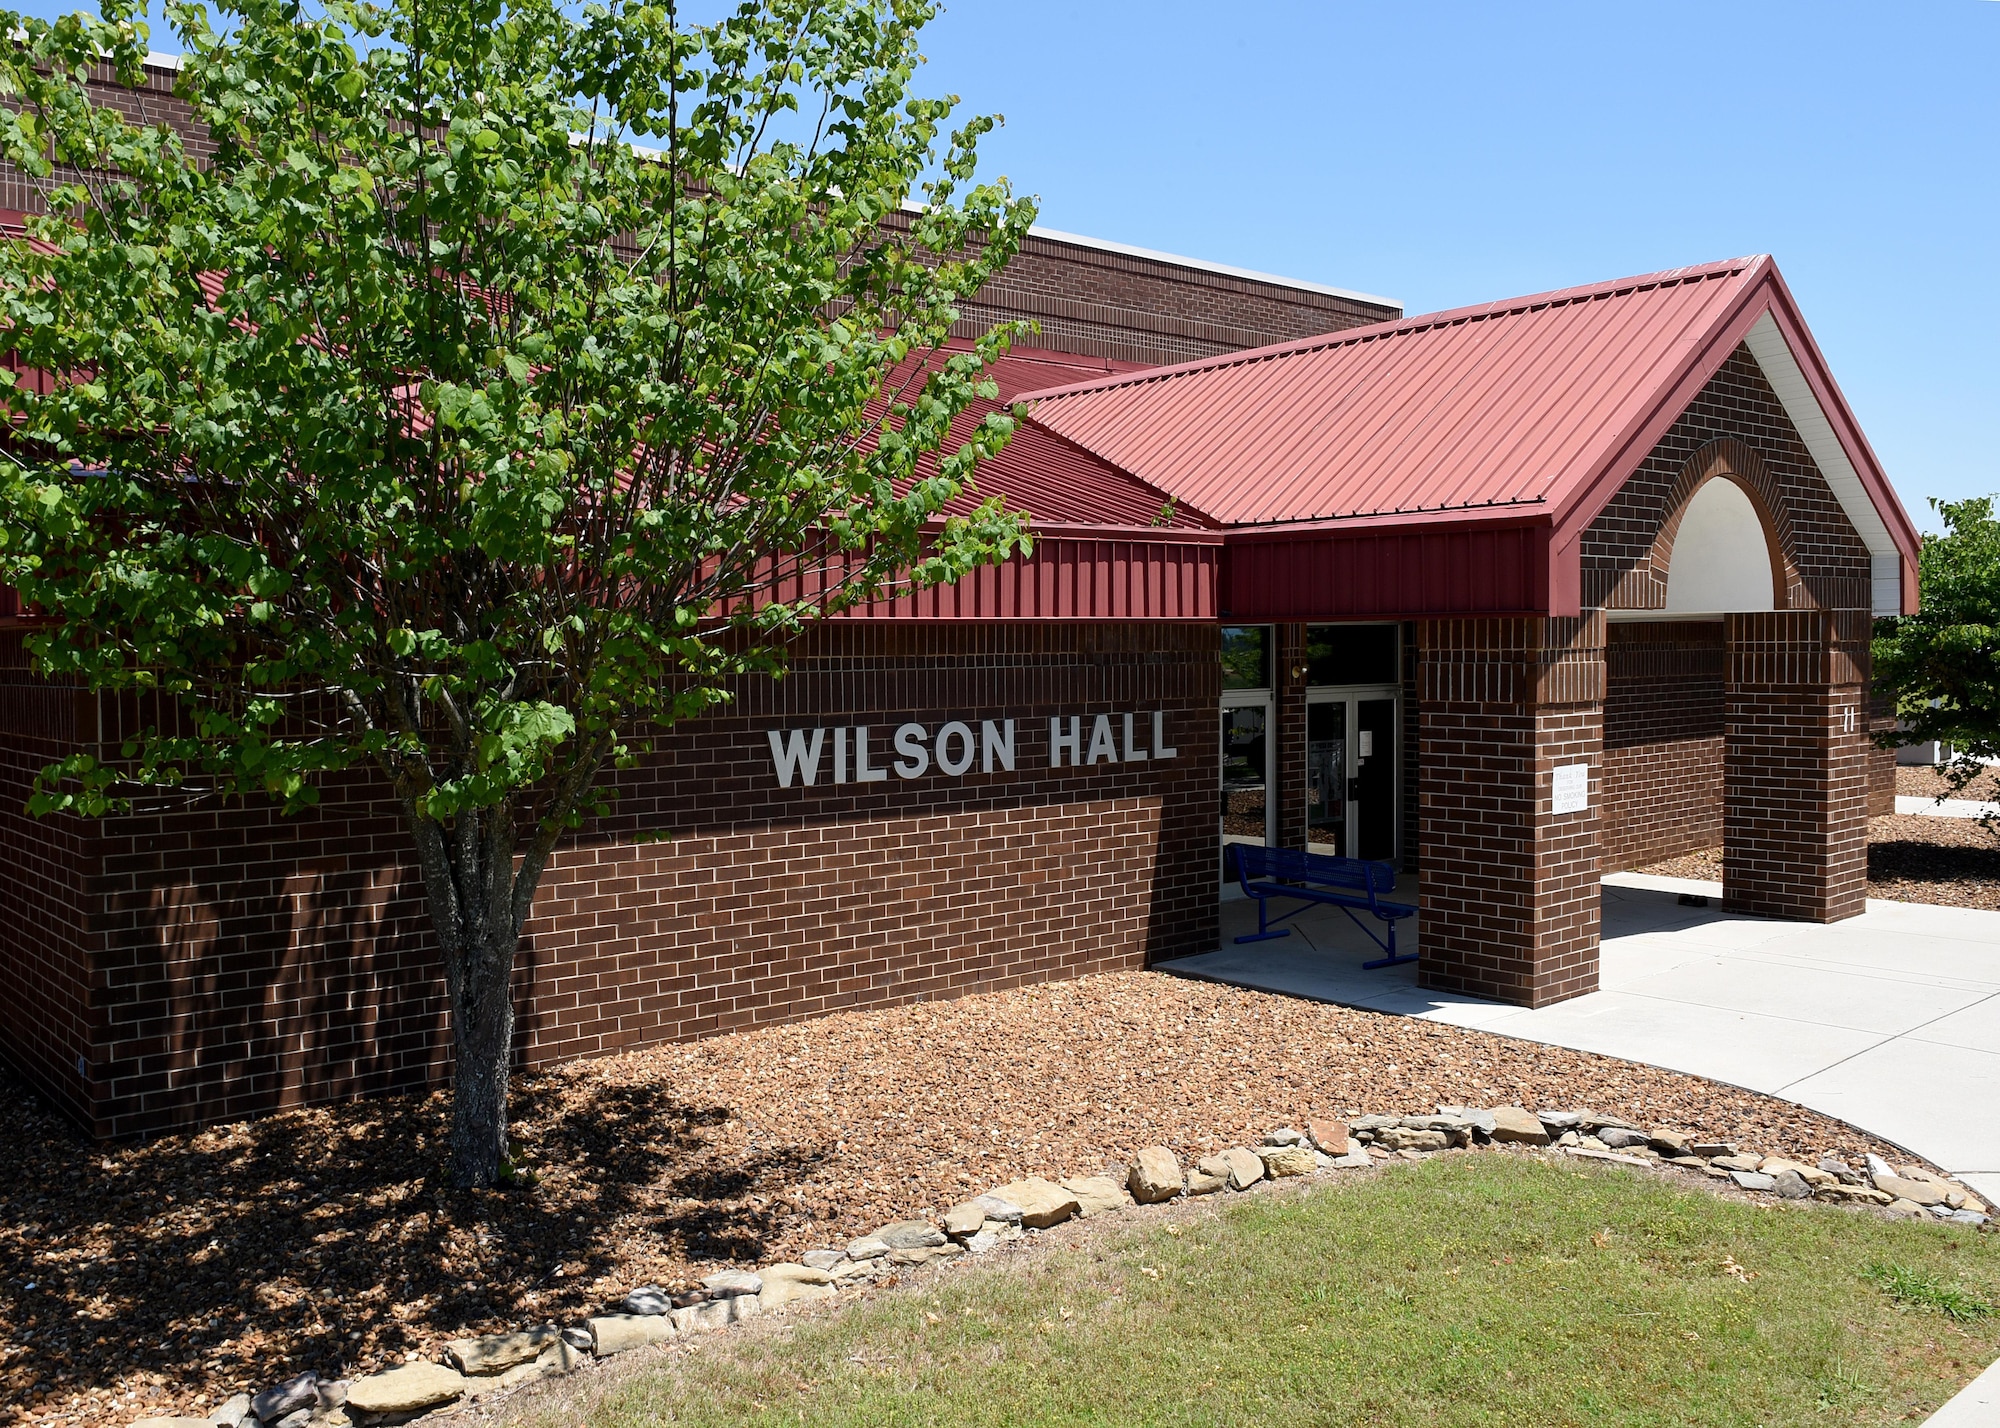 The I.G. Brown Training and Education Center’s current activities building with fitness equipment and a gymnasium – the place for EPME graduations and banquets – is named after Maj. Gen. Winston P. Wilson. General Wilson served as Chief of the National Guard Bureau and died in 1996. The demolished Wilson Hall base gymnasium, which the old staff converted into classrooms and a library, was named after a Lieutenant Wilson when the base was an active duty installation. Lieutenant Wilson died on a training flight. The training center serves thousands of active duty, Guard, and Reserve Airmen every year. (U.S. Air National Guard photo by Master Sgt. Mike R. Smith)